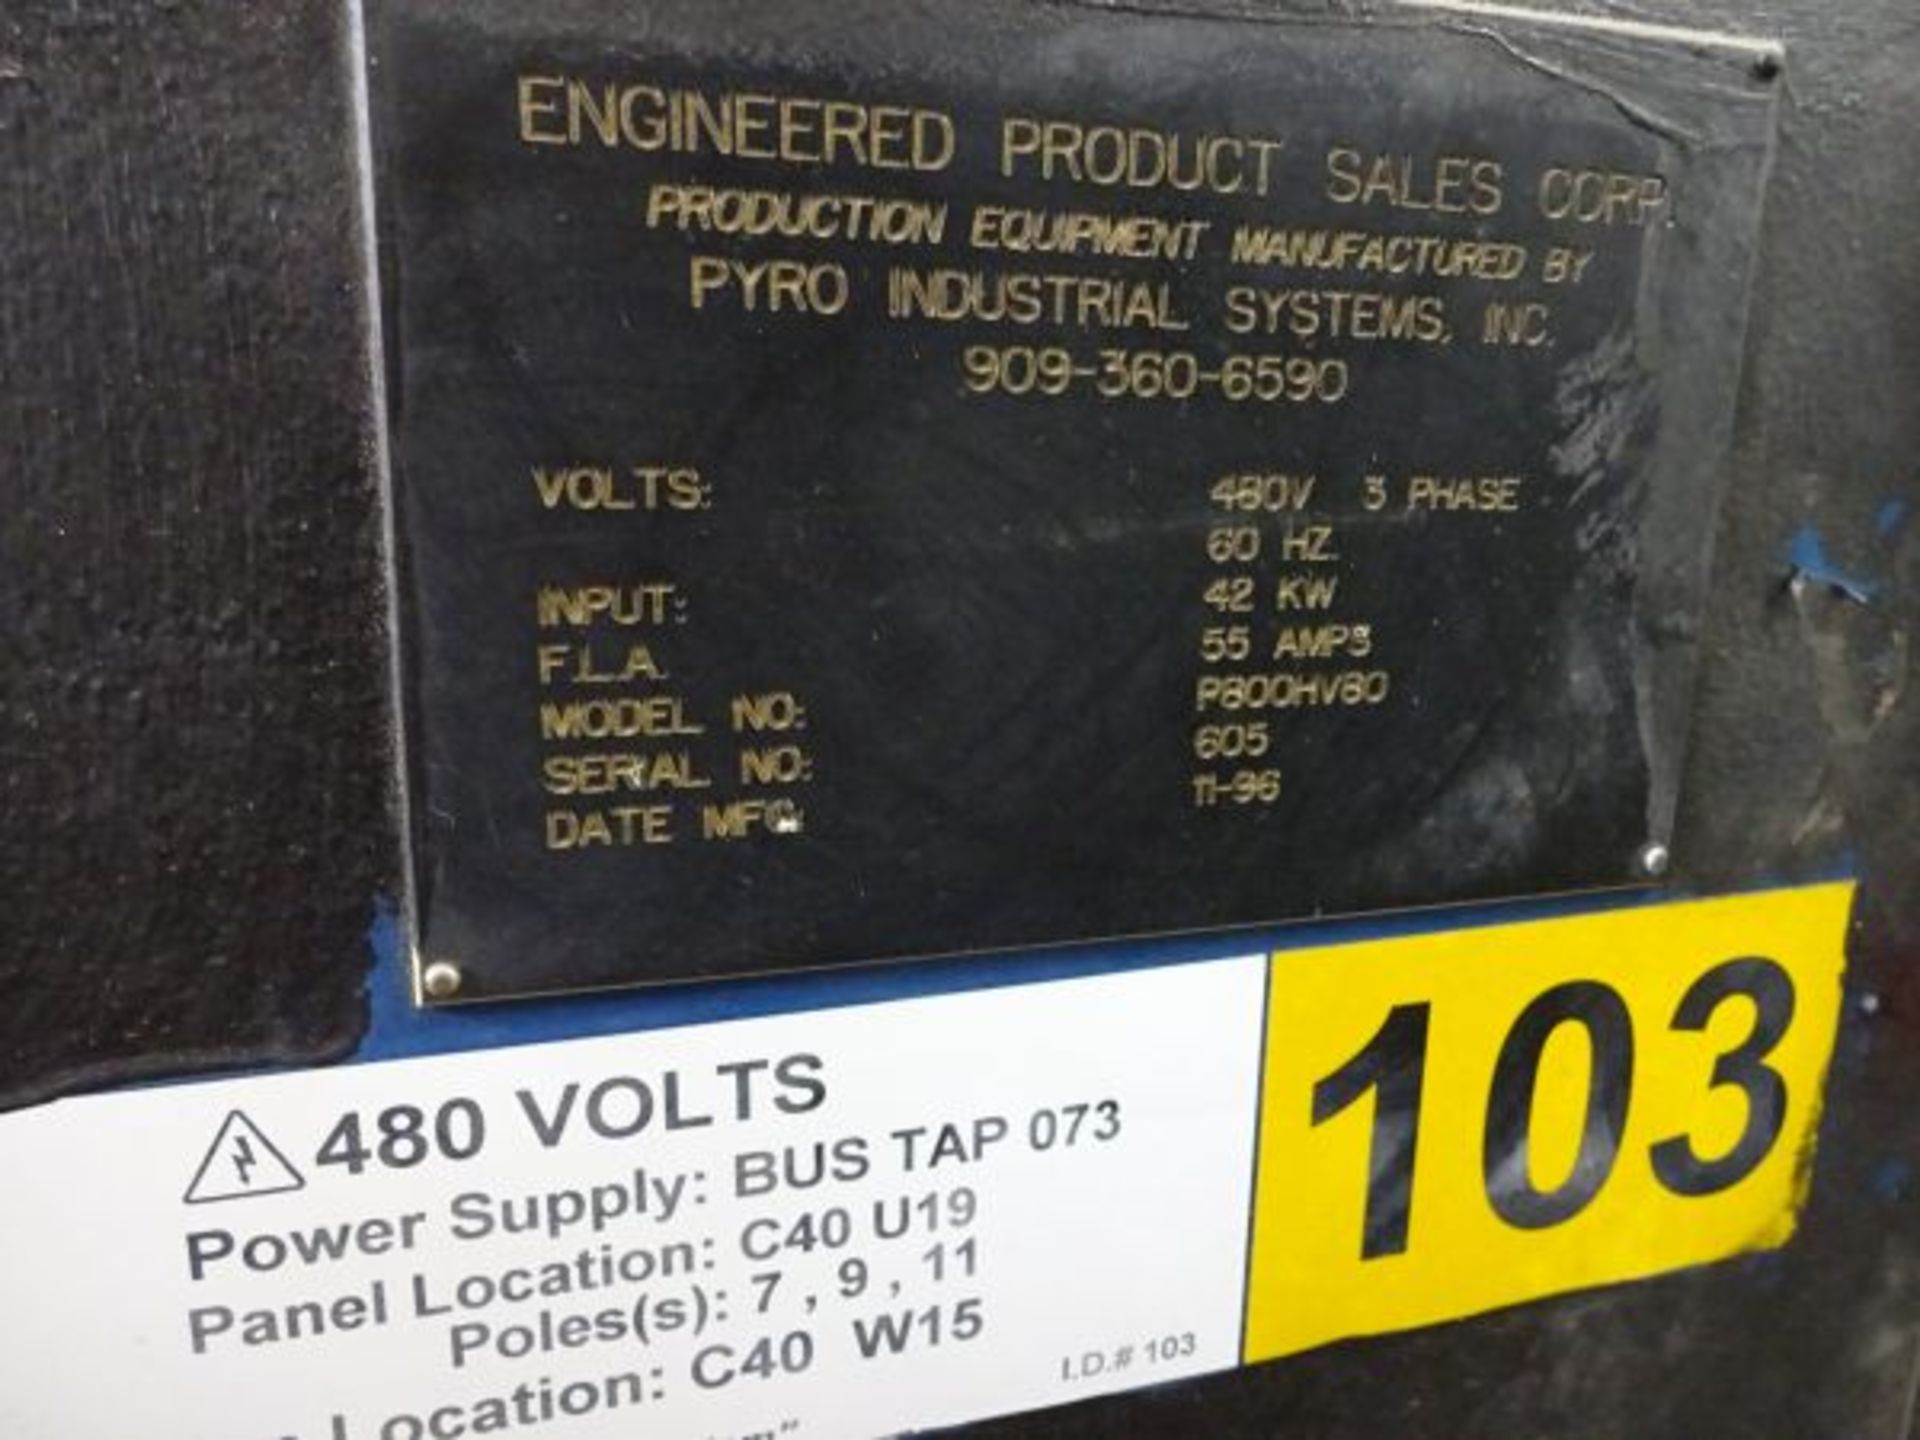 48" X 48" X 28" Engineered Products Sale Corp. Model P800HV80 Electric Batch Oven; S/N 605, 23.5" - Image 2 of 7